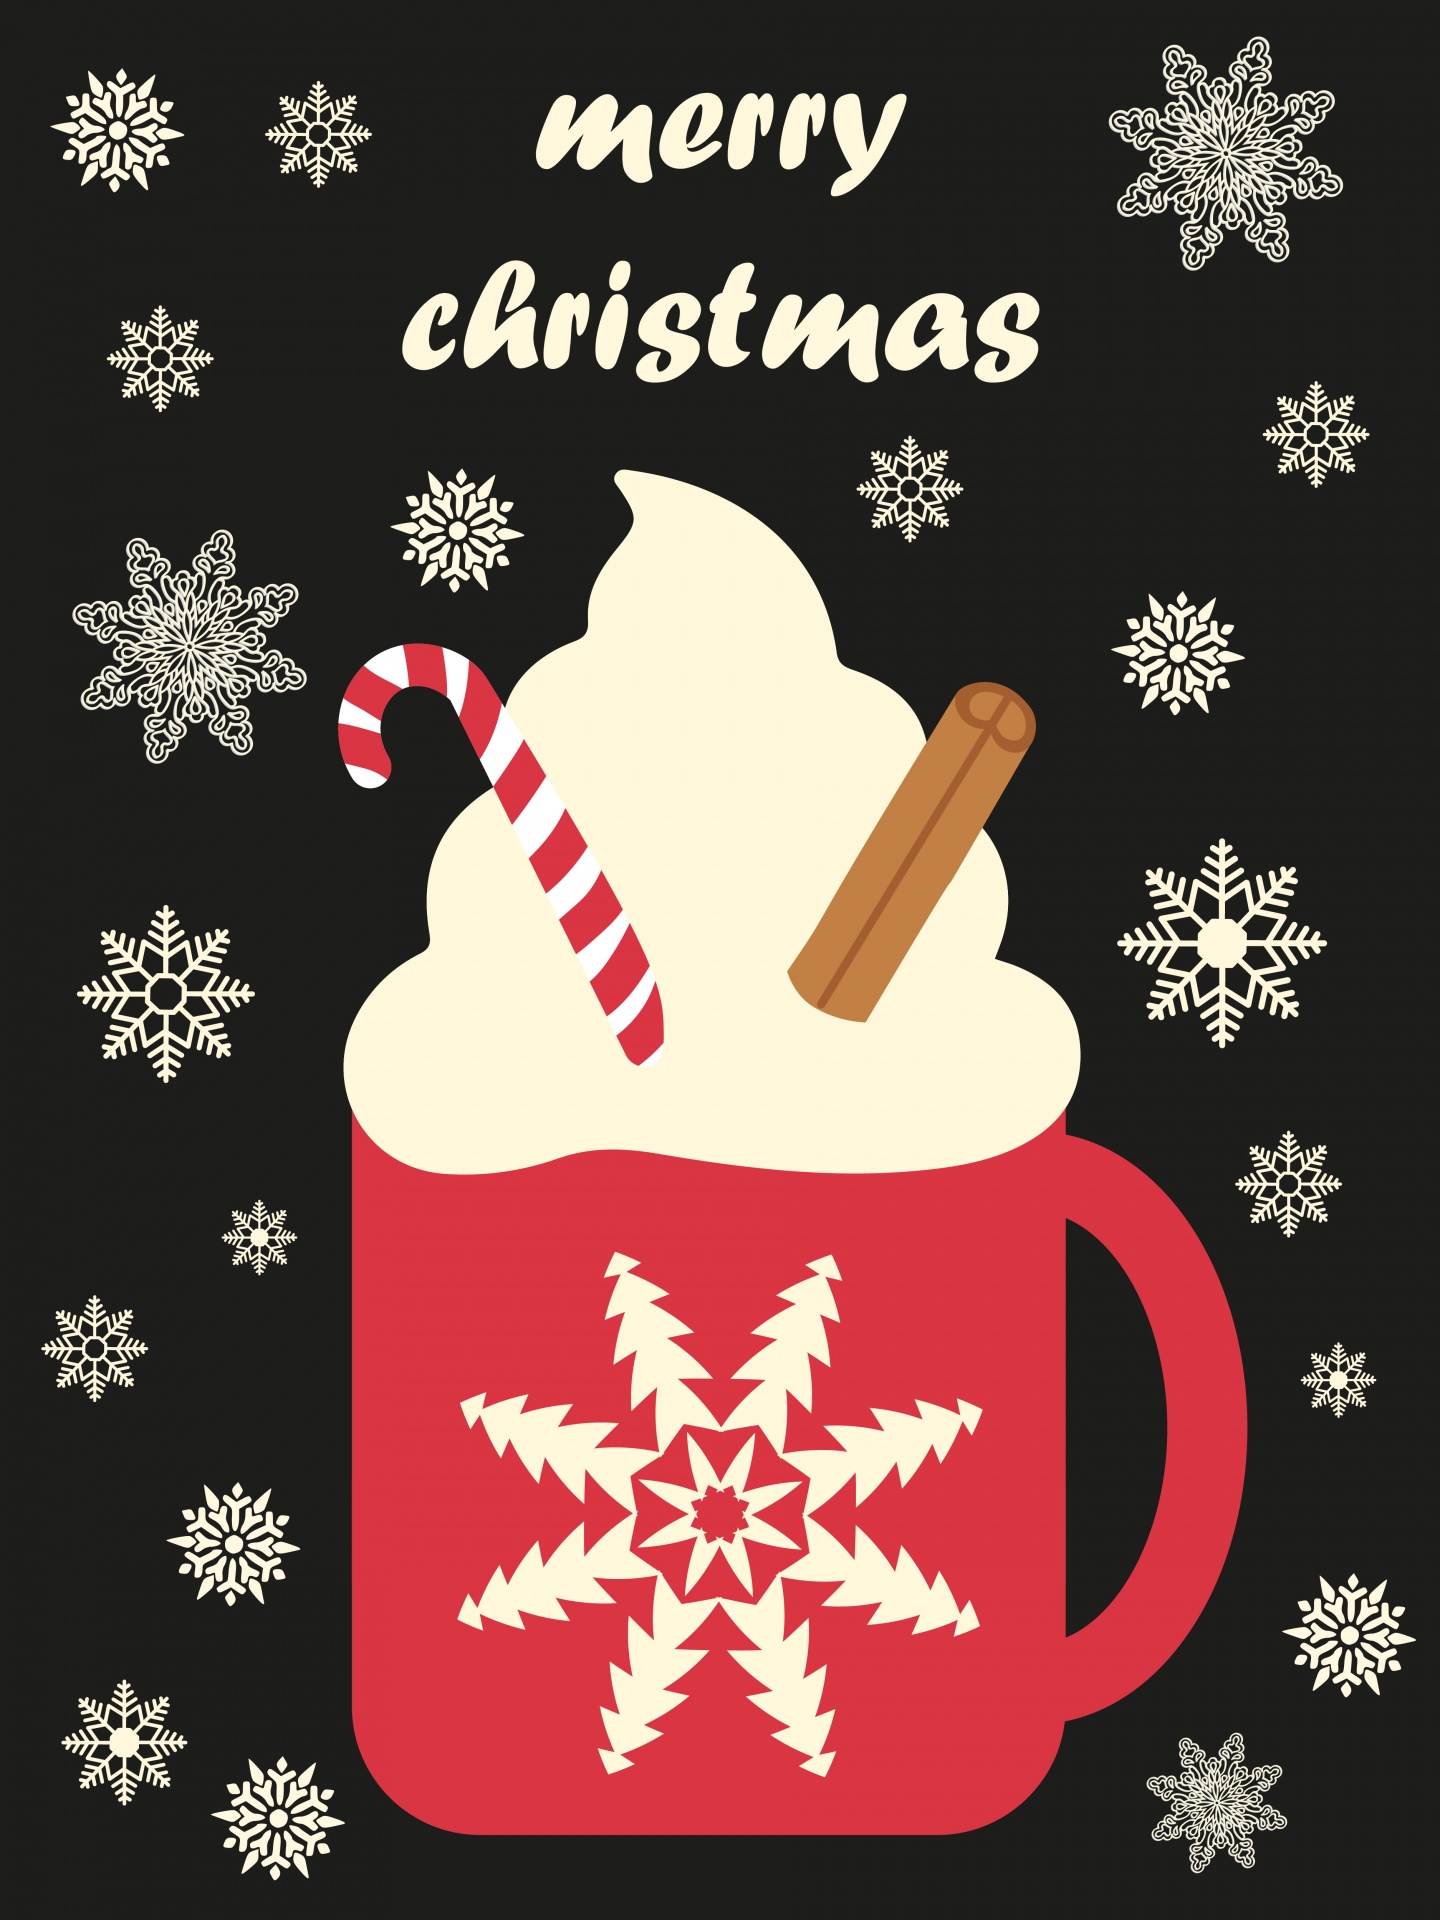 Hot chocolate drink in red mug with cream and candy cane on a snowflake background and typography merry christmas